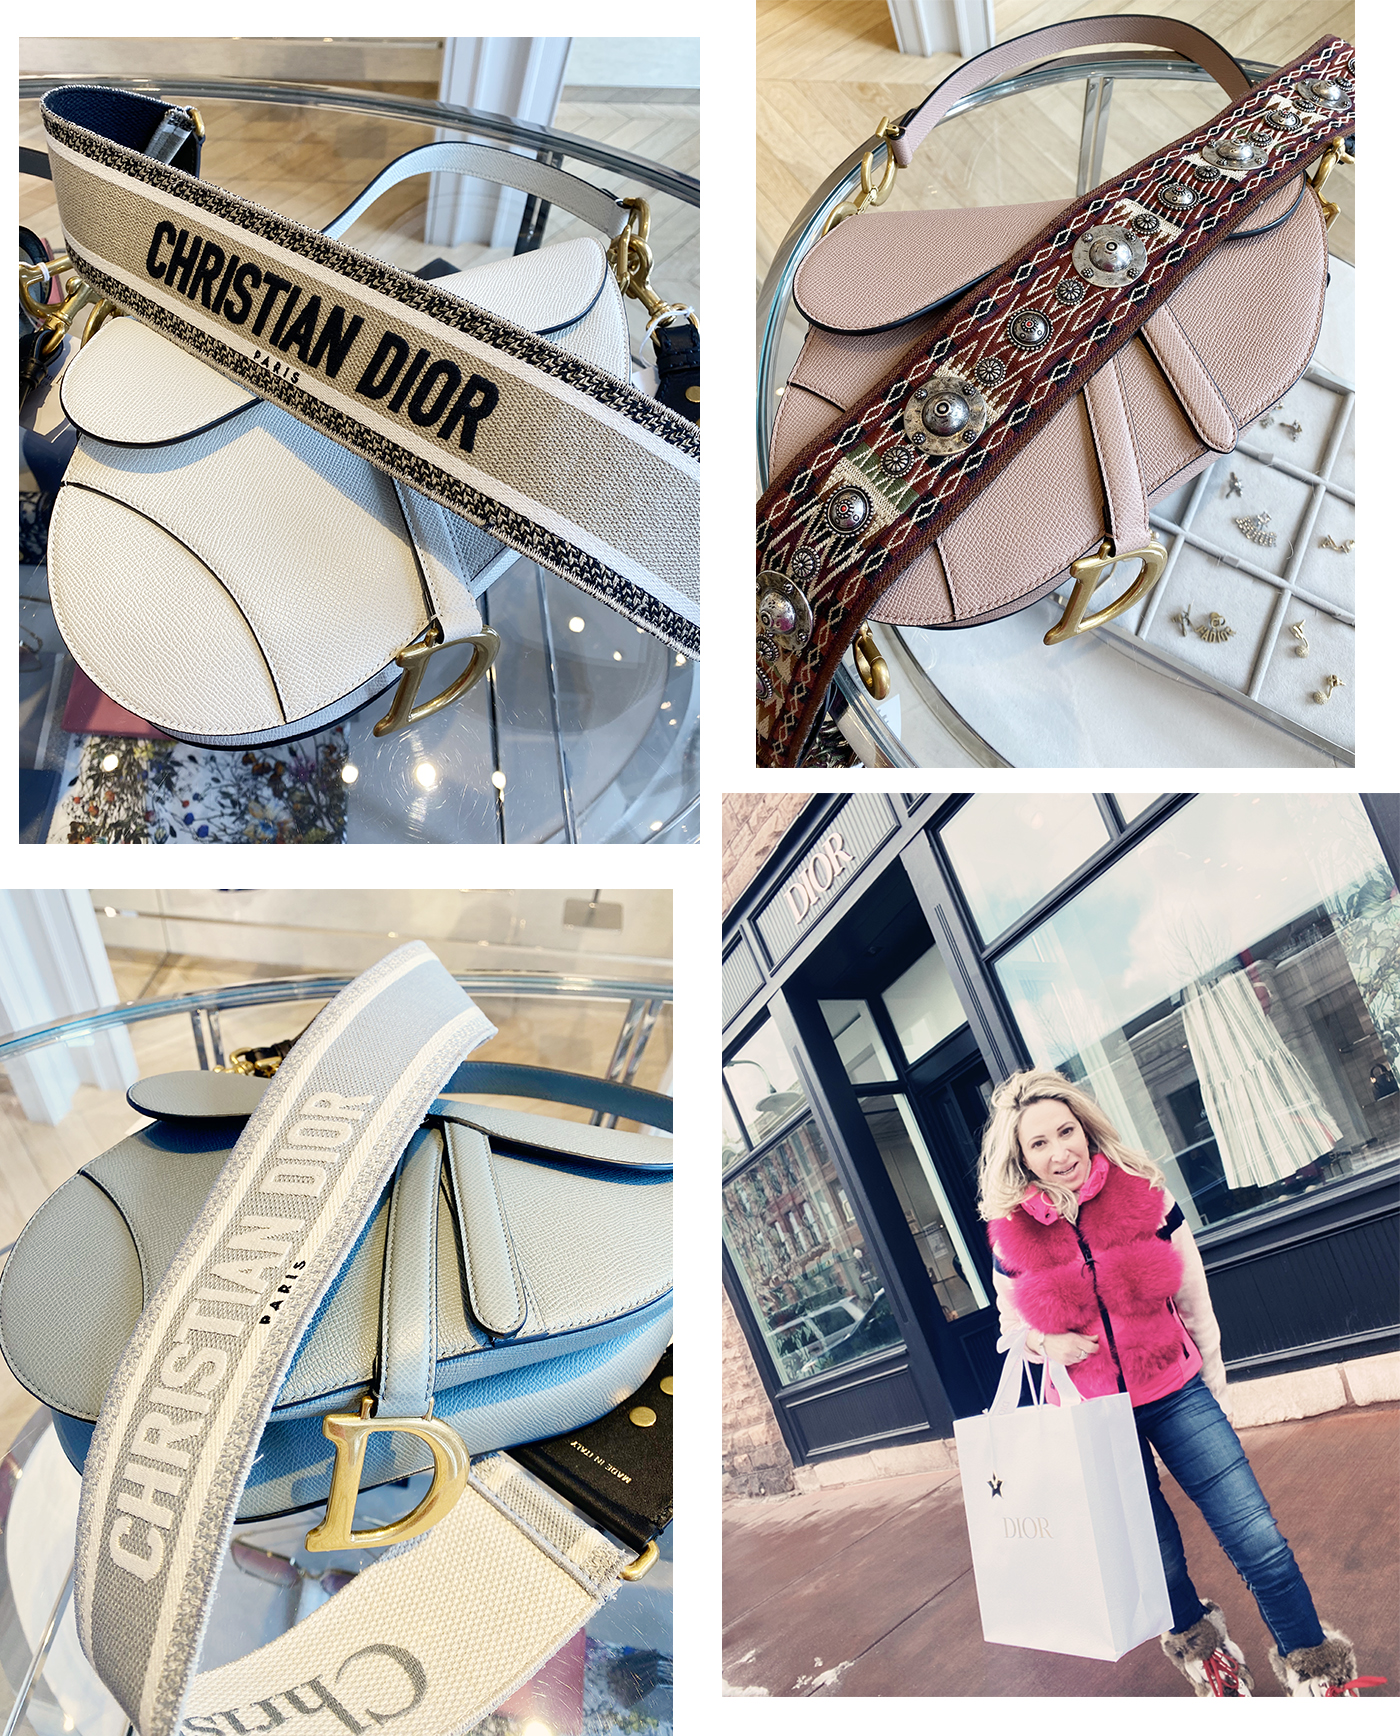 Dior Saddle Bags in Aspen, Colorado and Marla Meridith